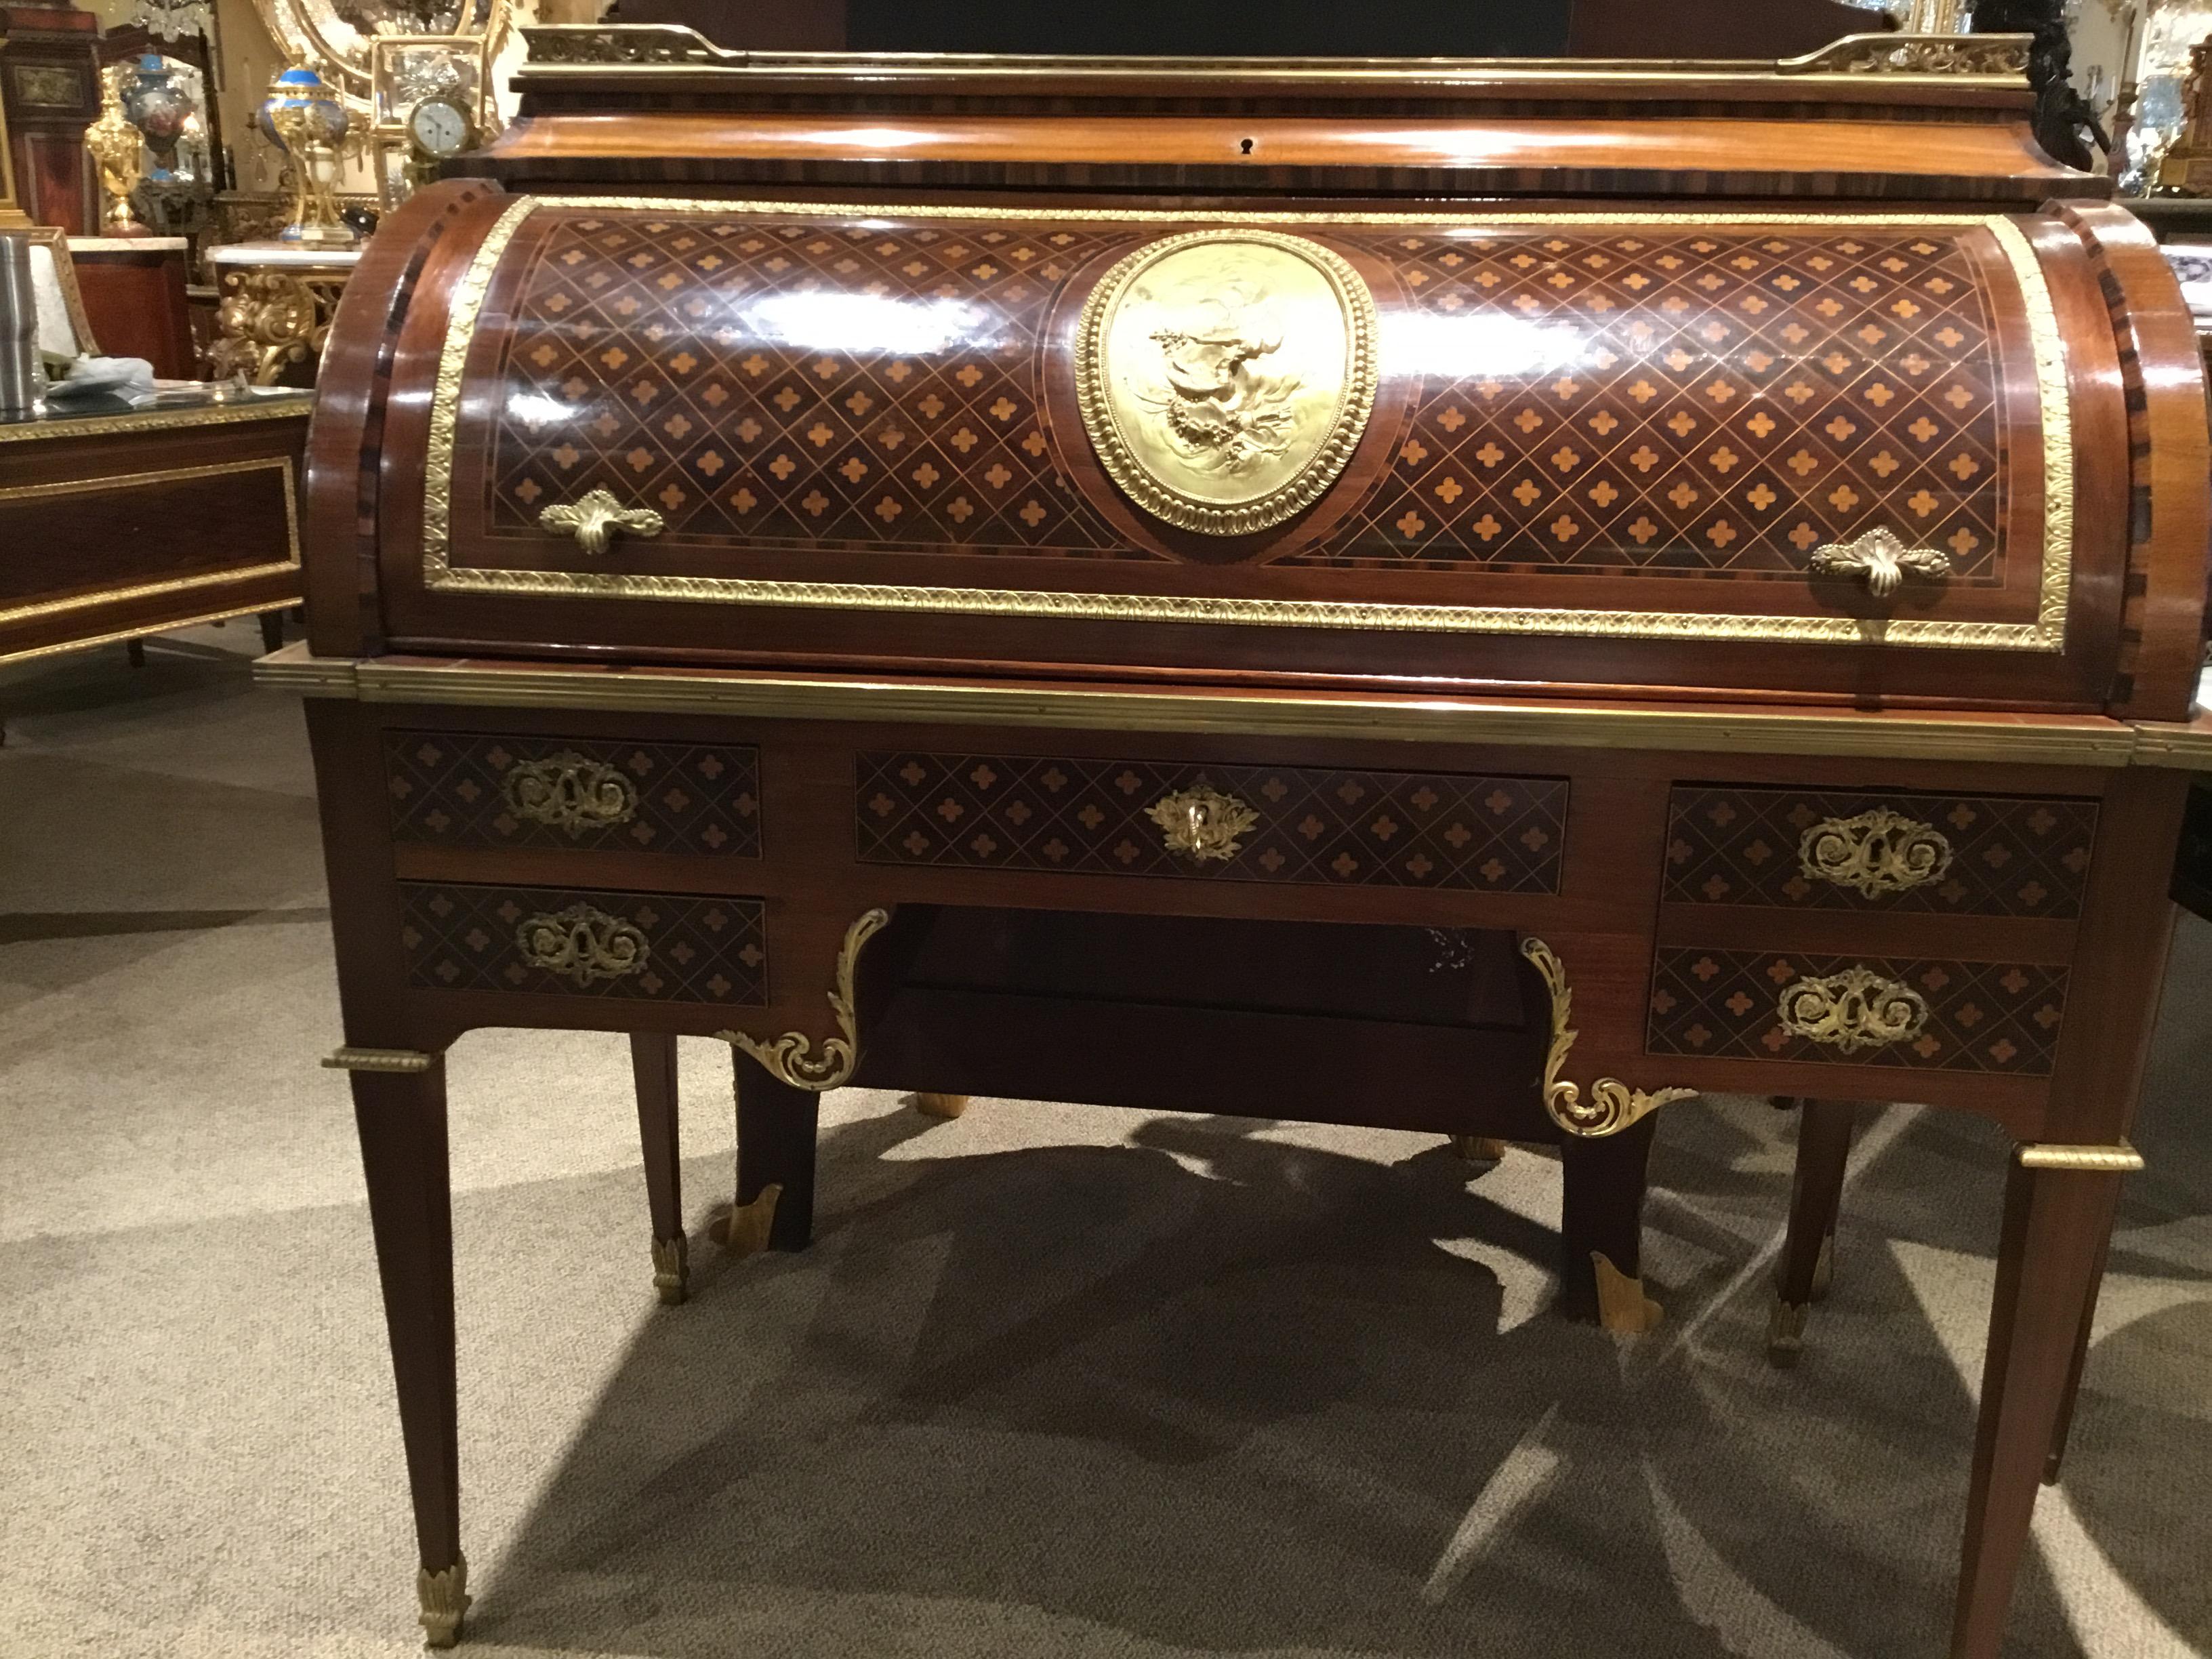 Antique French marquetry and parquetry bureau a cylindre
After Francois Linke. This secretaire a cylindre is in the
Louis XVI style. The top has a gallery along the back and sides.
The roll top is inlaid with kingwood, walnut and tulipwood and